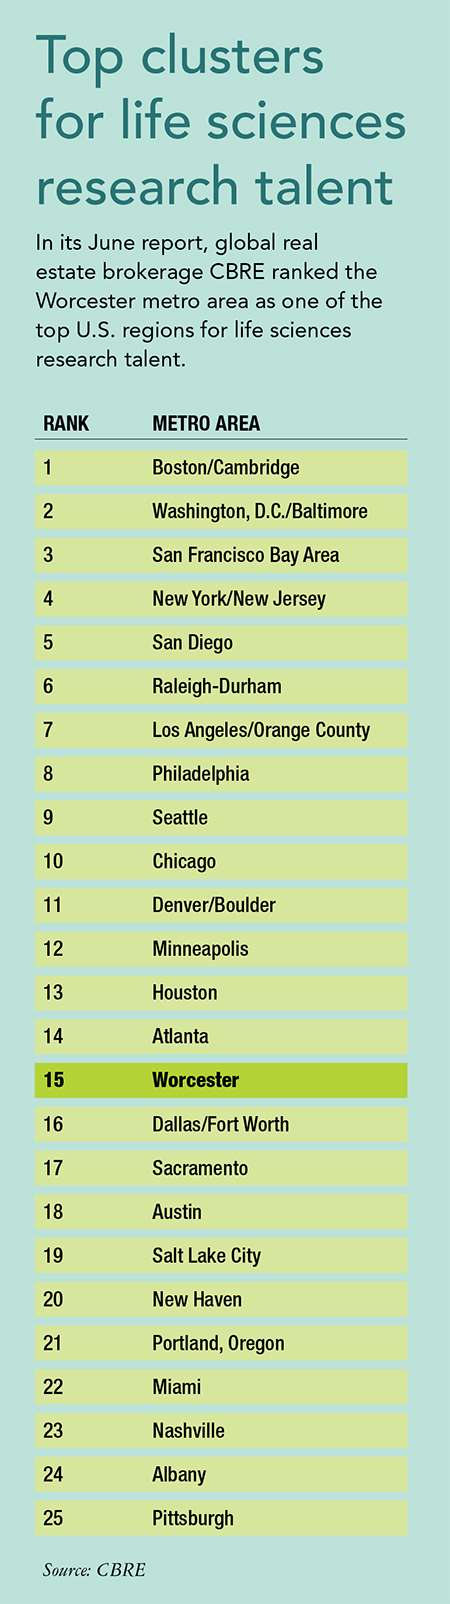 Top clusters for life sciences research talent. Worcester is #15